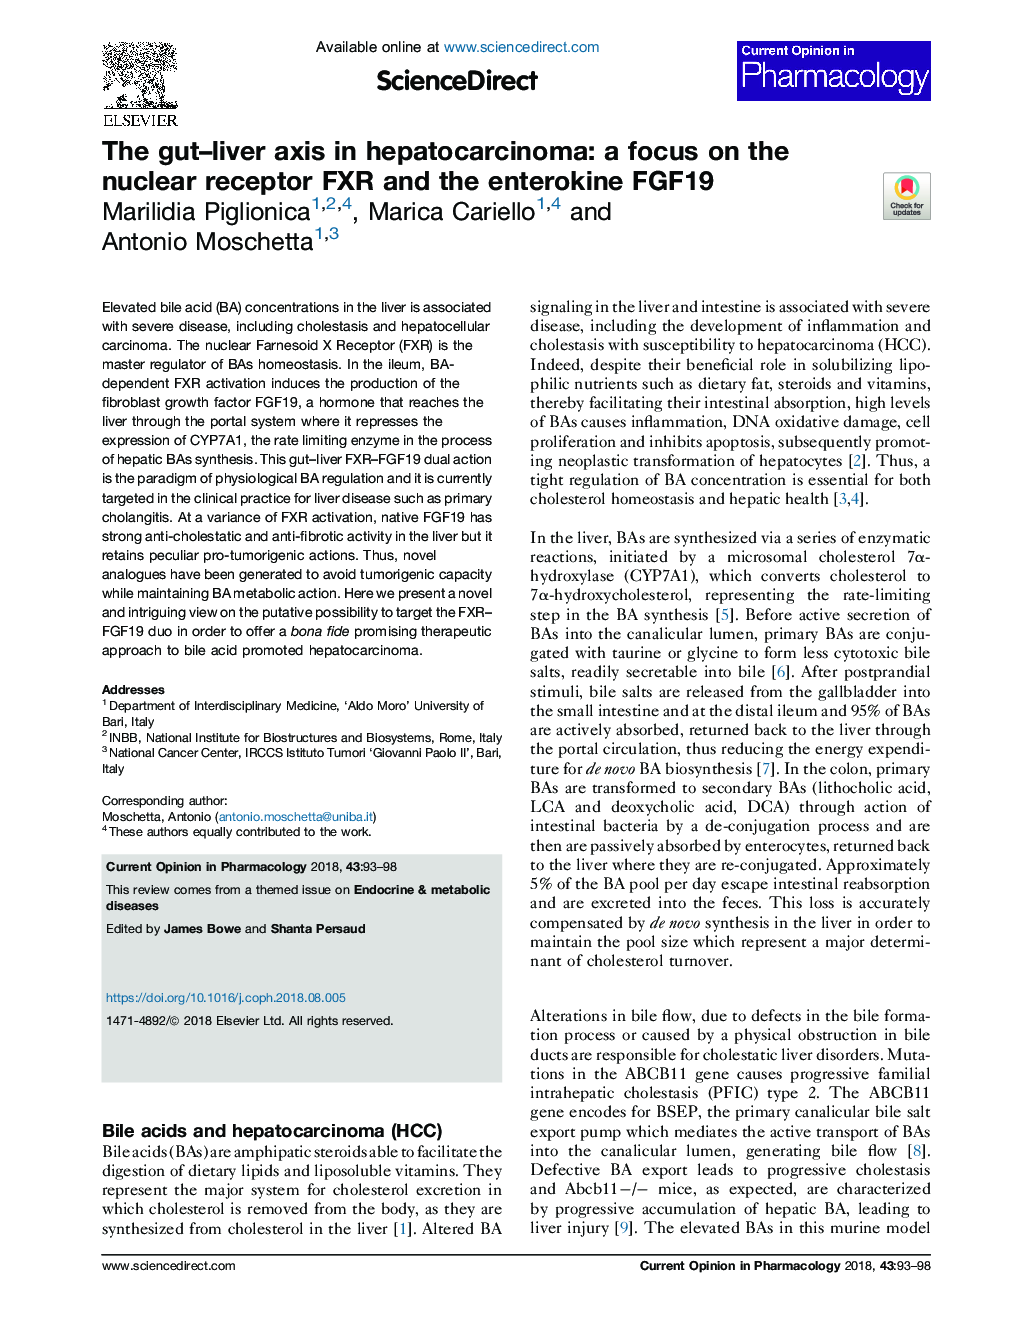 The gut-liver axis in hepatocarcinoma: a focus on the nuclear receptor FXR and the enterokine FGF19